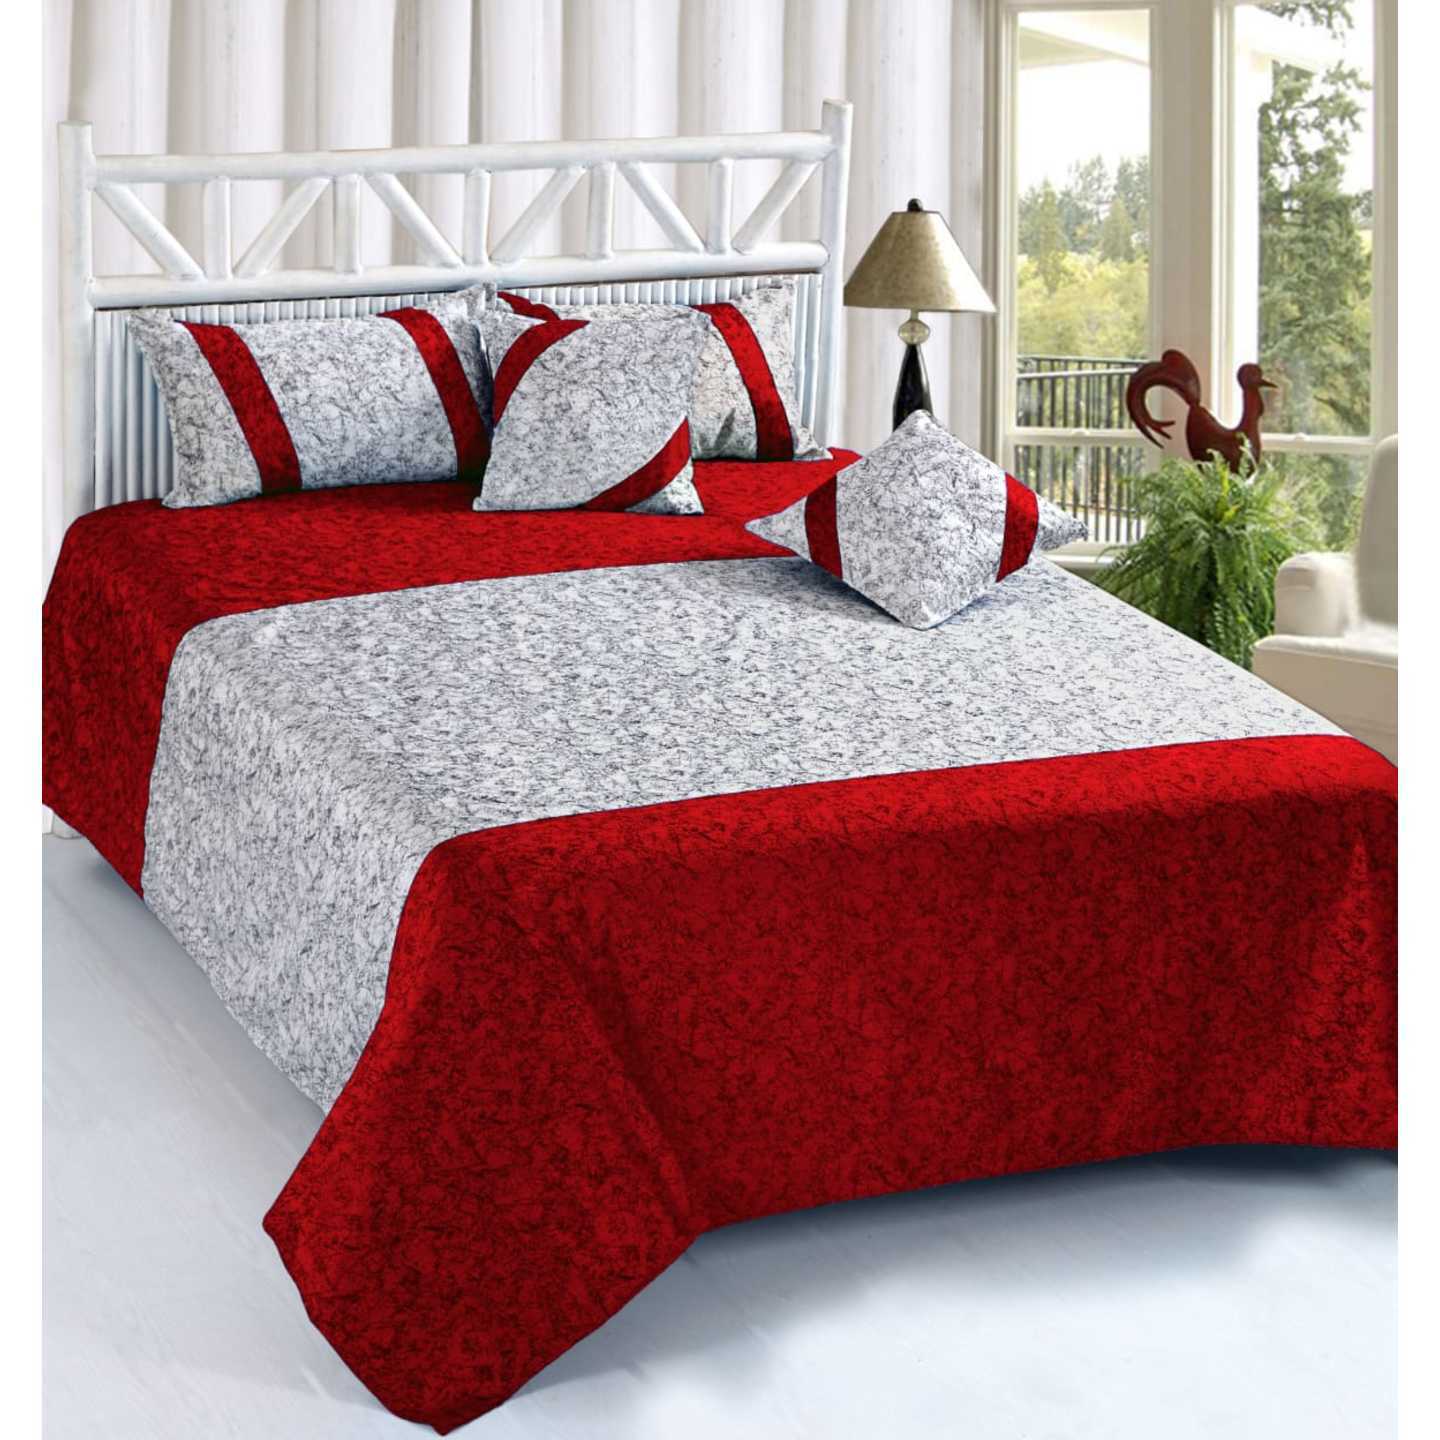 Handtex Home Red White Texture Print Velvet Double Bedsheet,2 cushion cover and 2 pillow cover